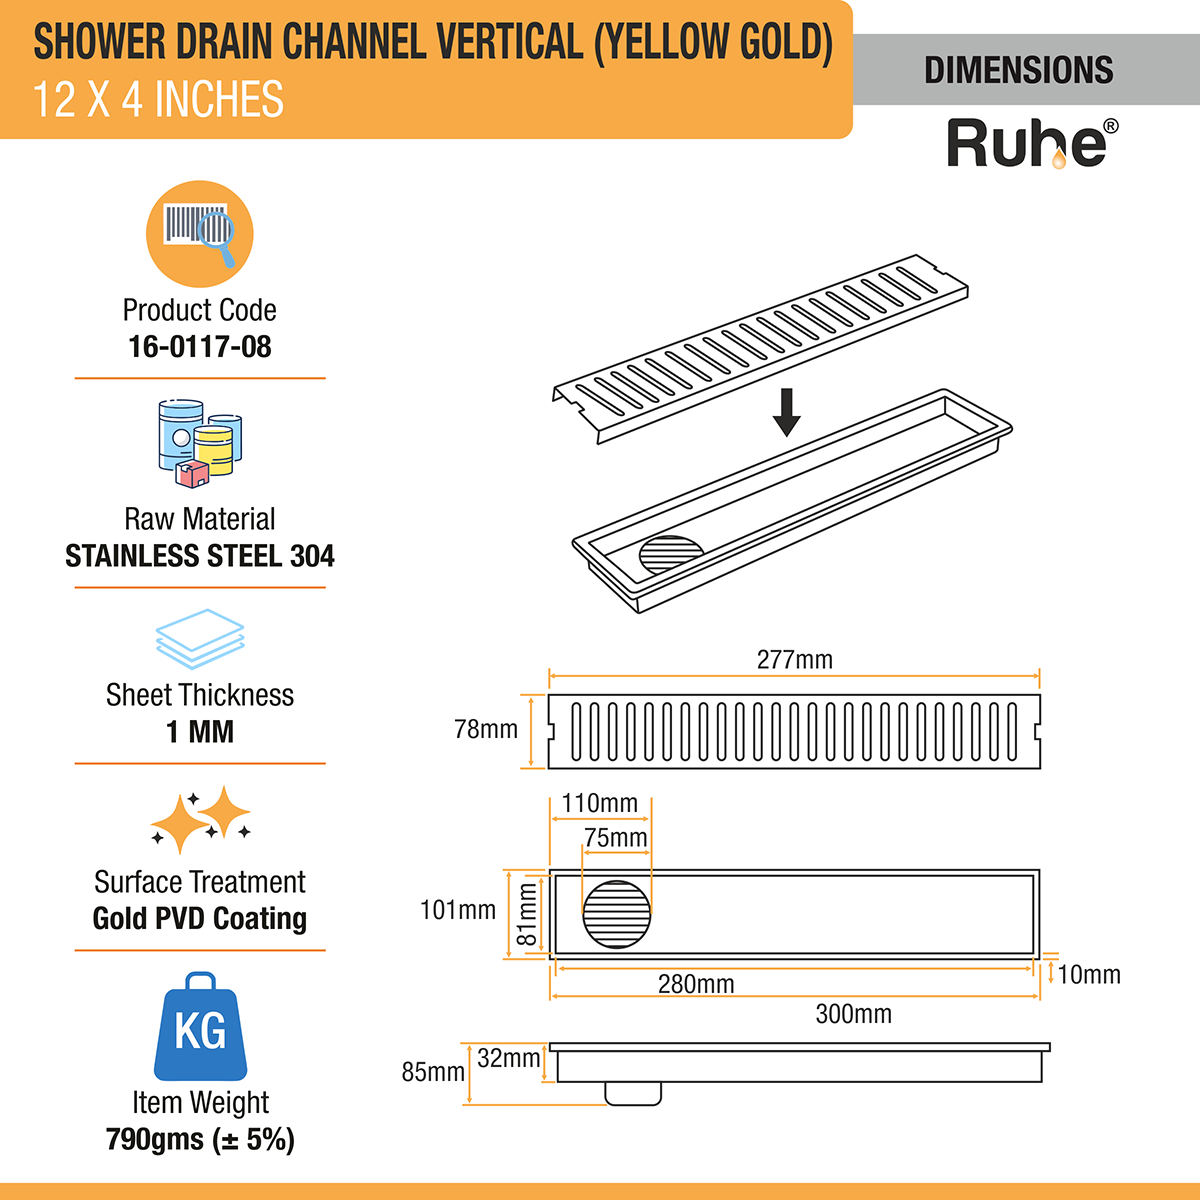 Vertical Shower Drain Channel (12 x 4 Inches) YELLOW GOLD dimensions and size